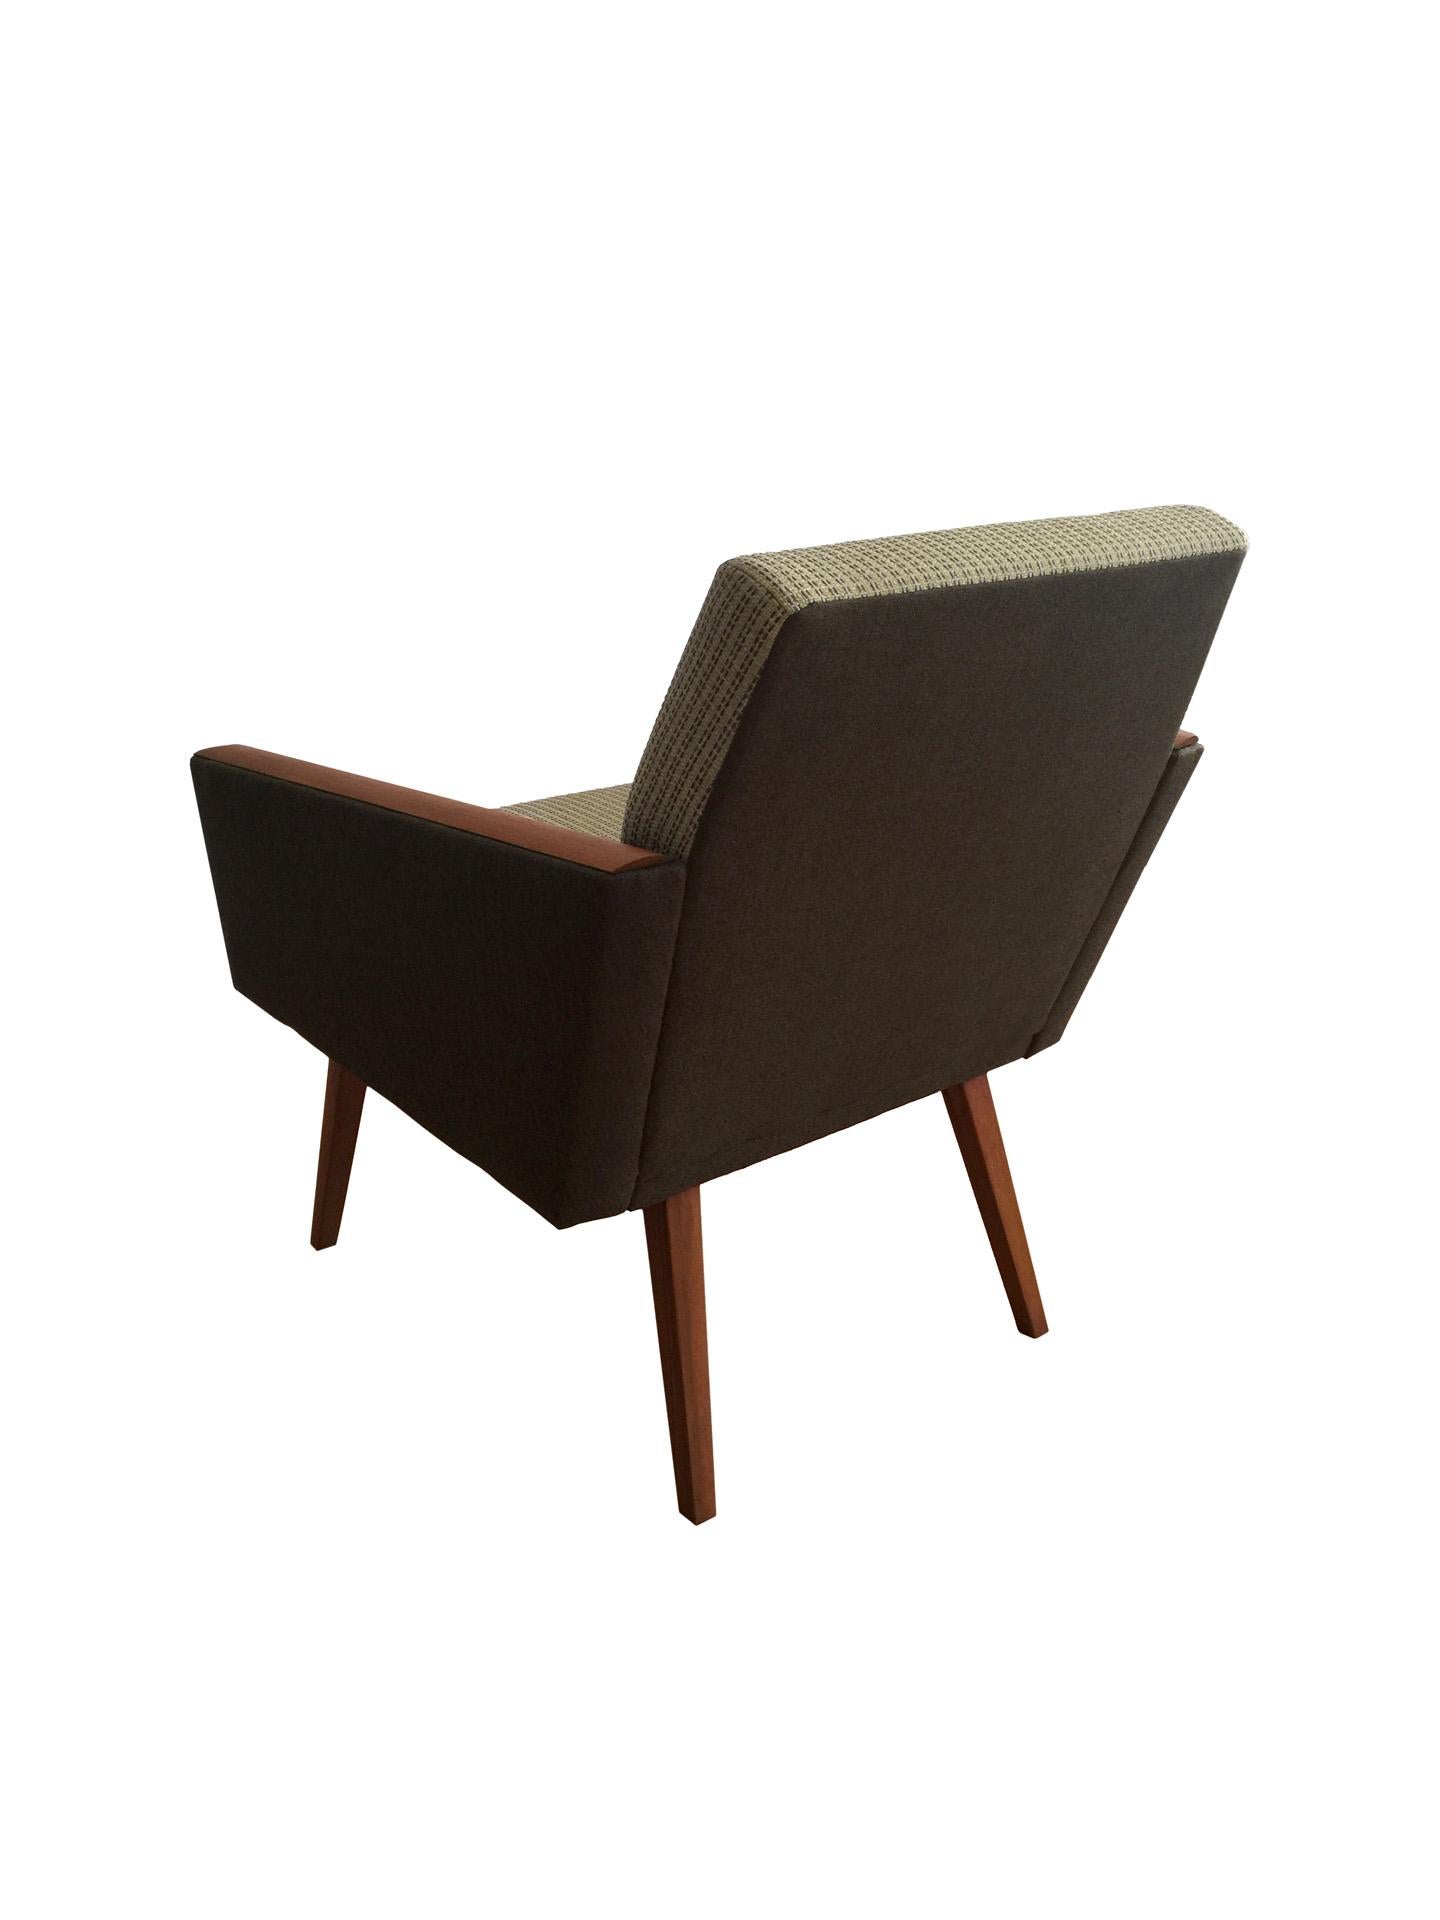 Hand-Crafted Mid-Century Modern Lounge Armchair in Olive, 1970s For Sale